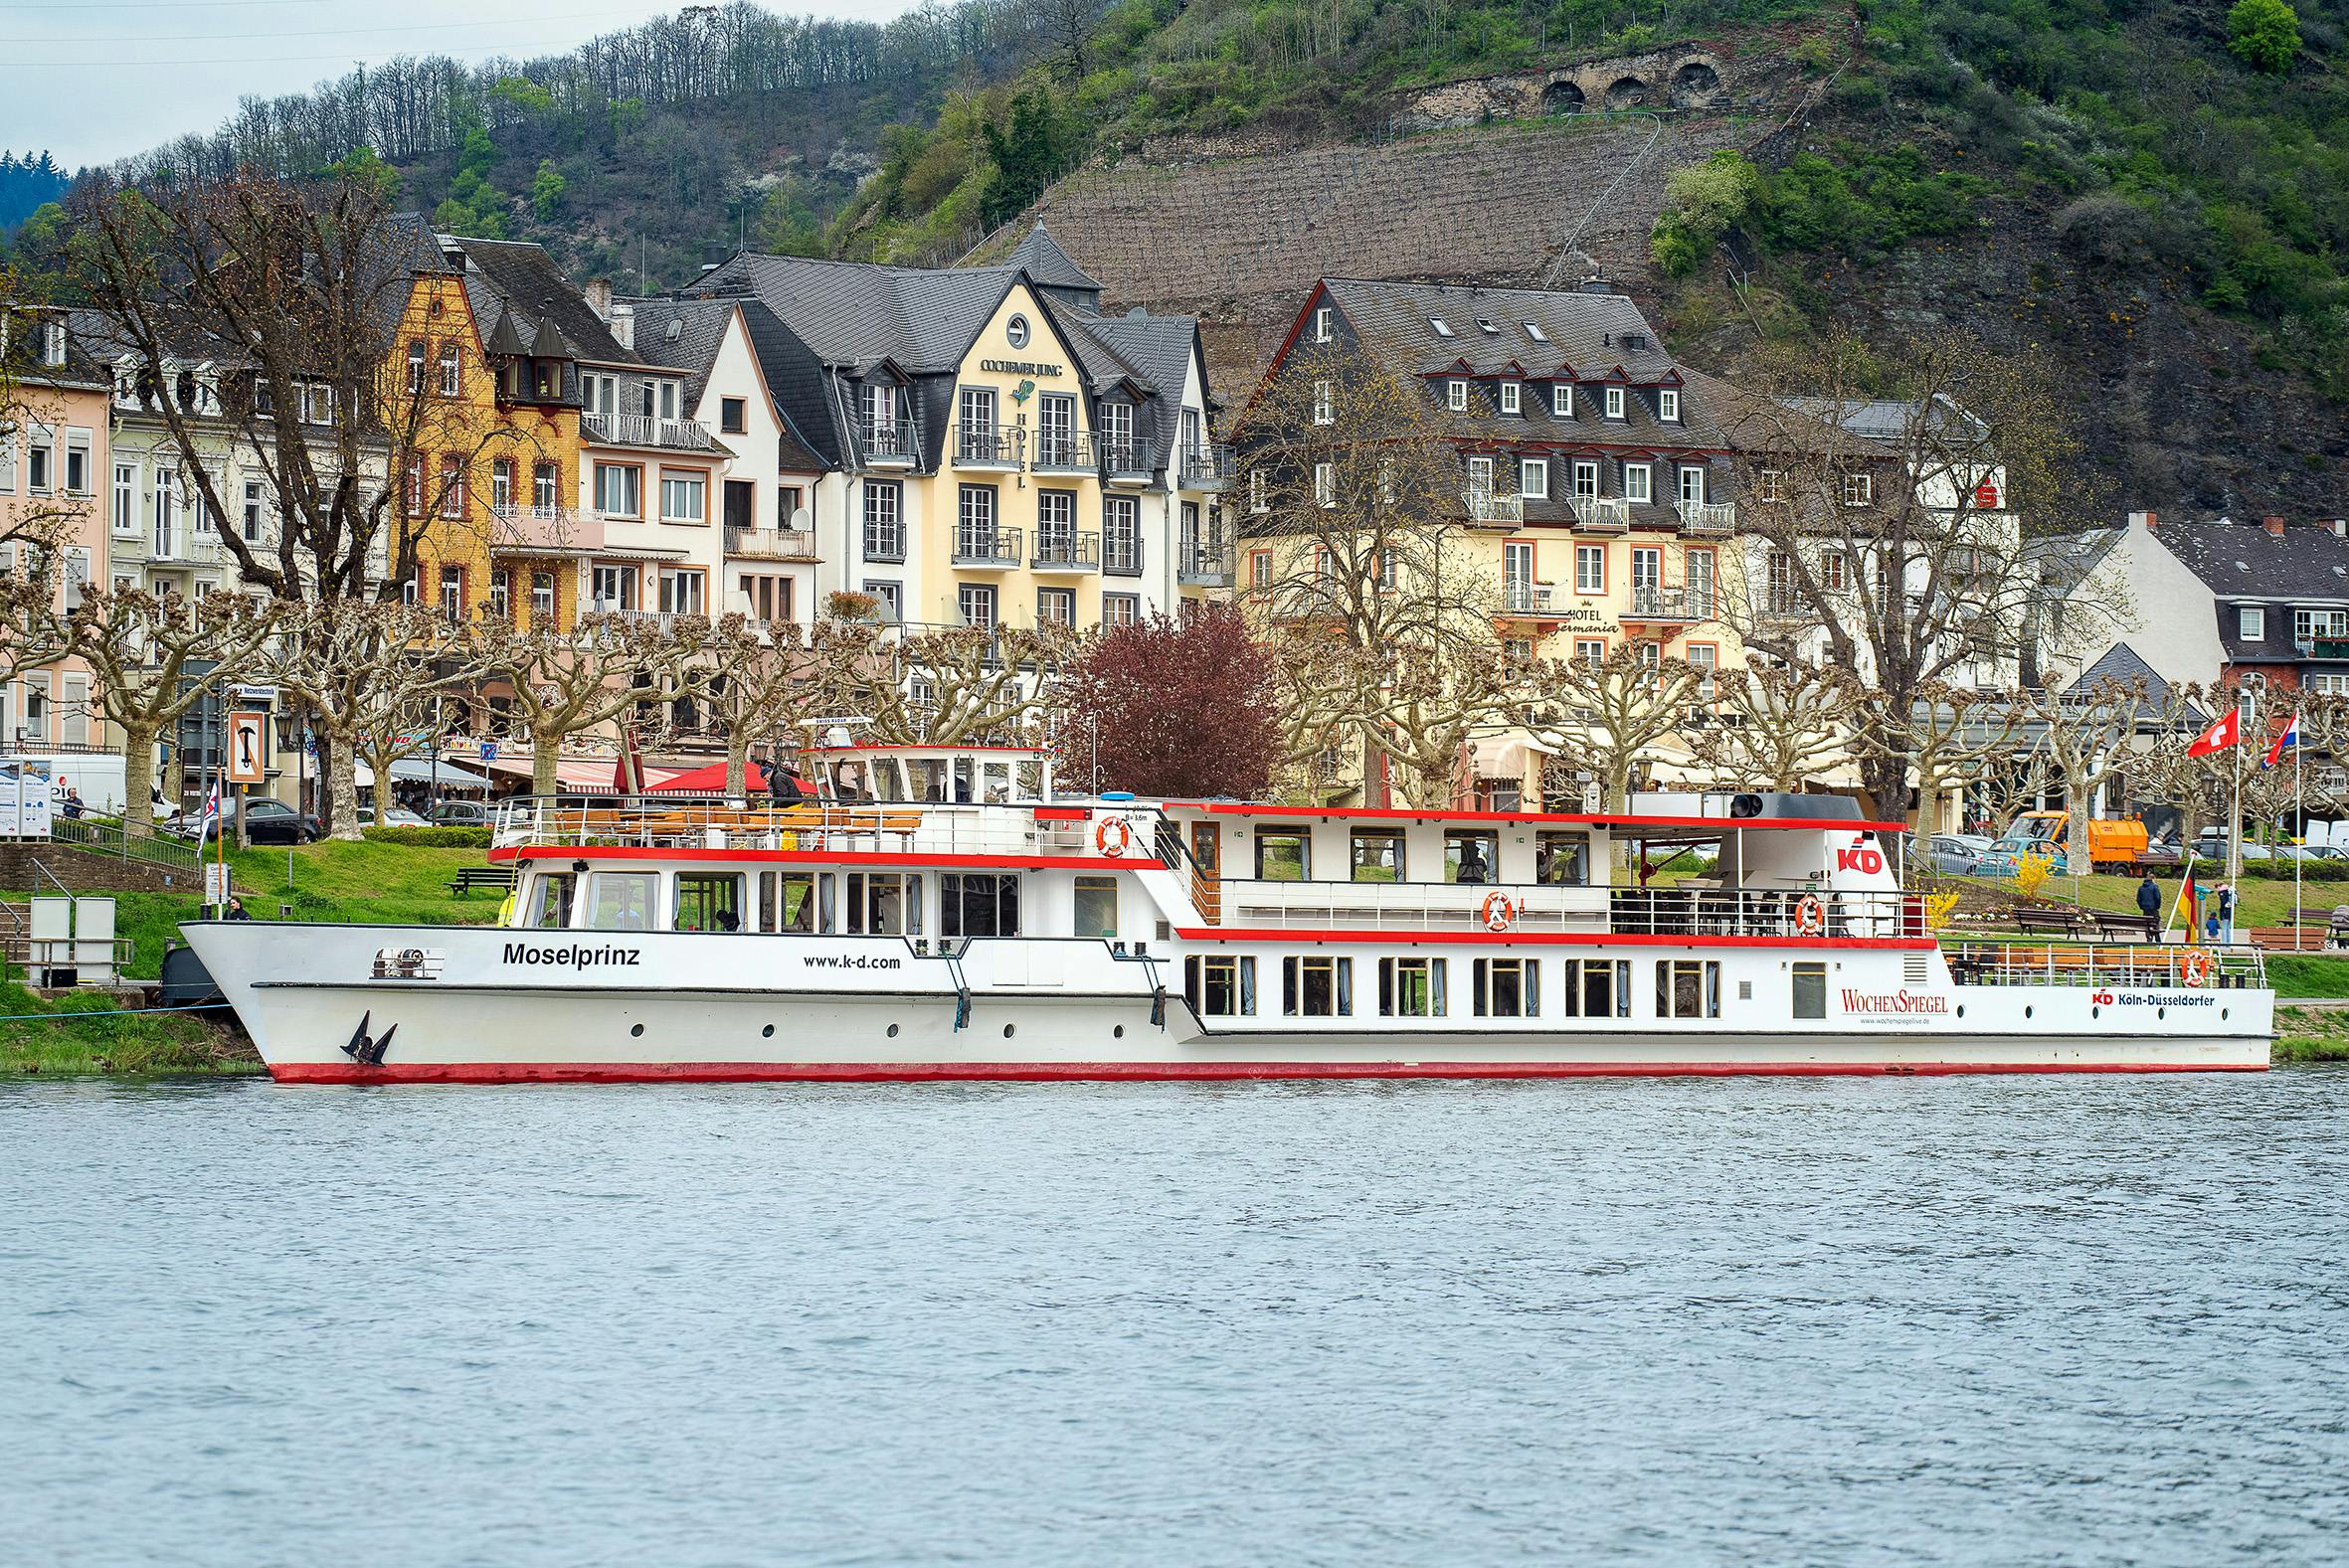 Panorama-Bootstour durch Cochem mit Audioguide